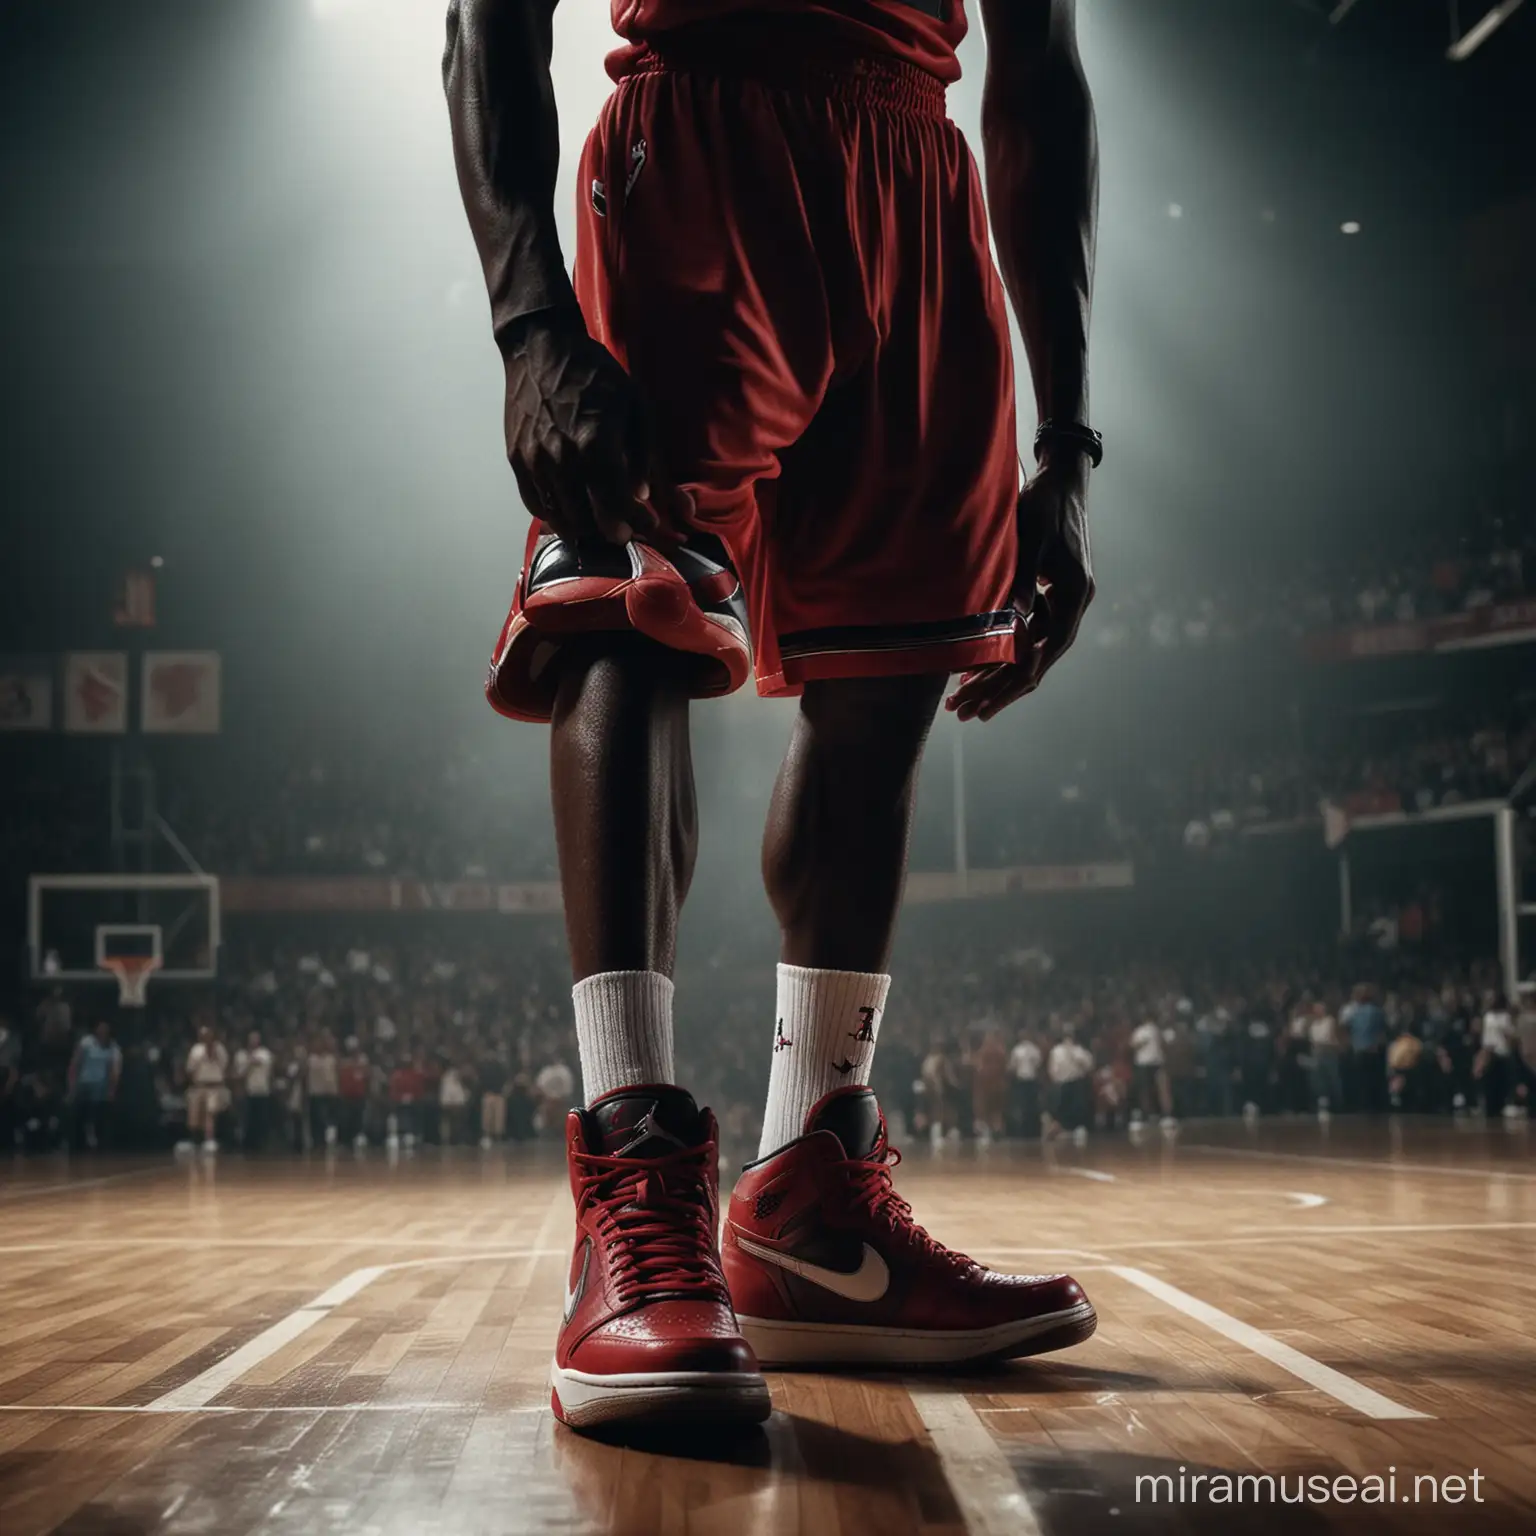 Basketball Legend Michael Jordan in Action with Iconic Sneakers